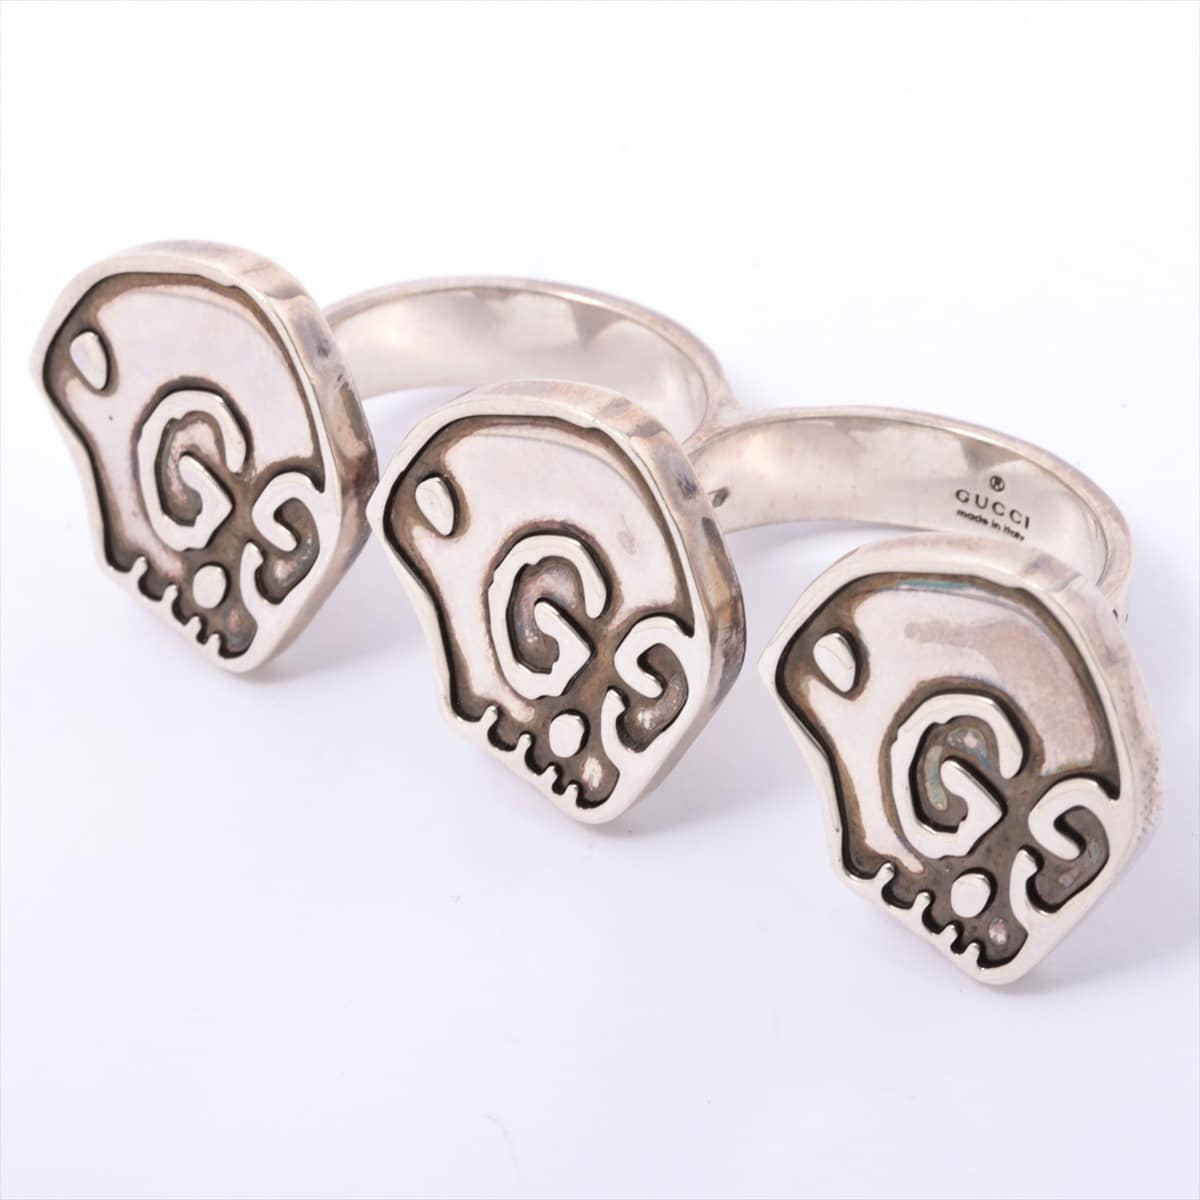 Gucci Ghost rings 925 Silver